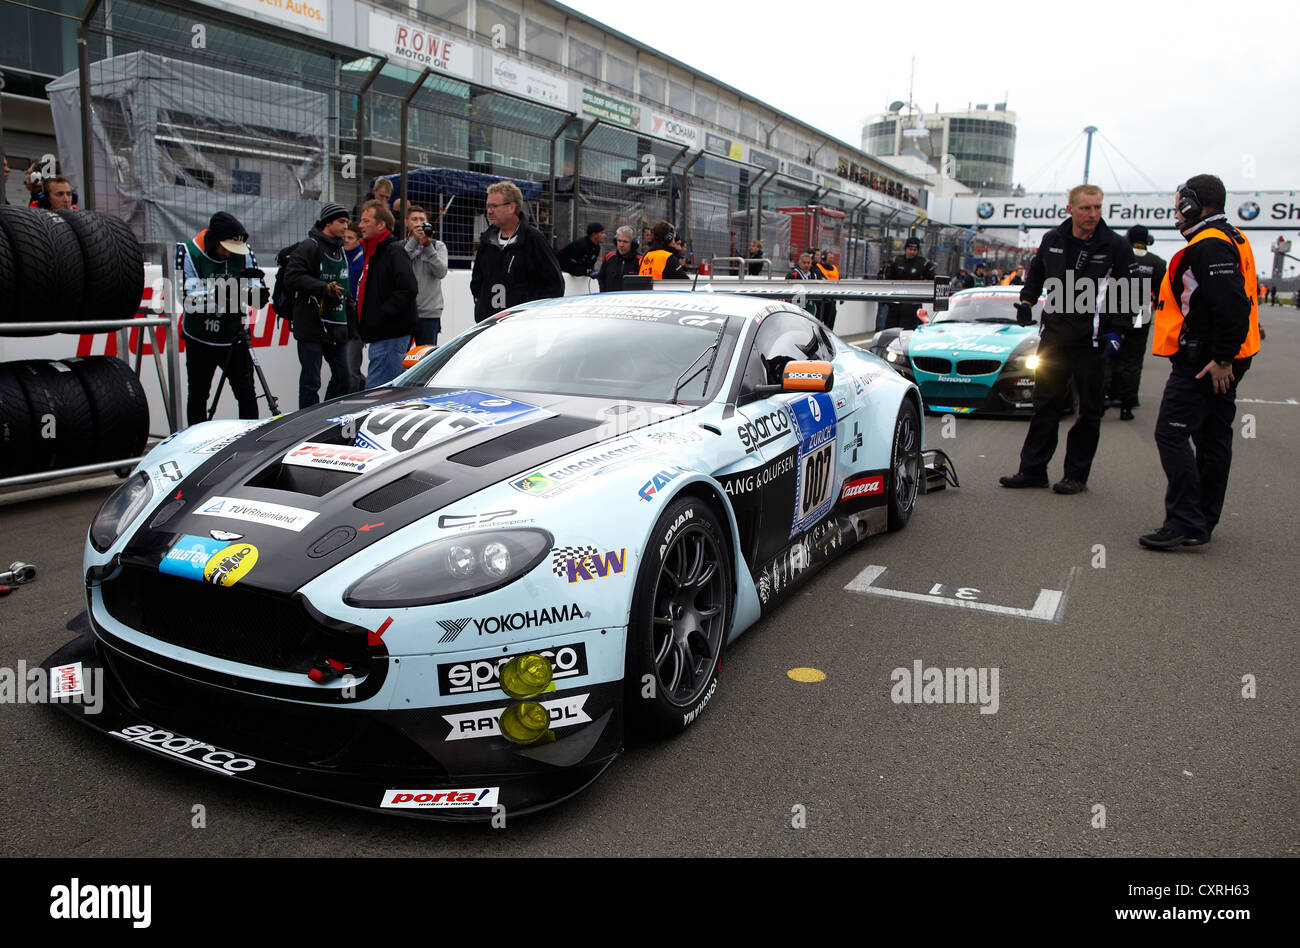 24-hour race on the Nurburgring race track 2012, Top40-Qualifying, Aston Martin Vantage GT3, Team Young Driver AMR Stock Photo